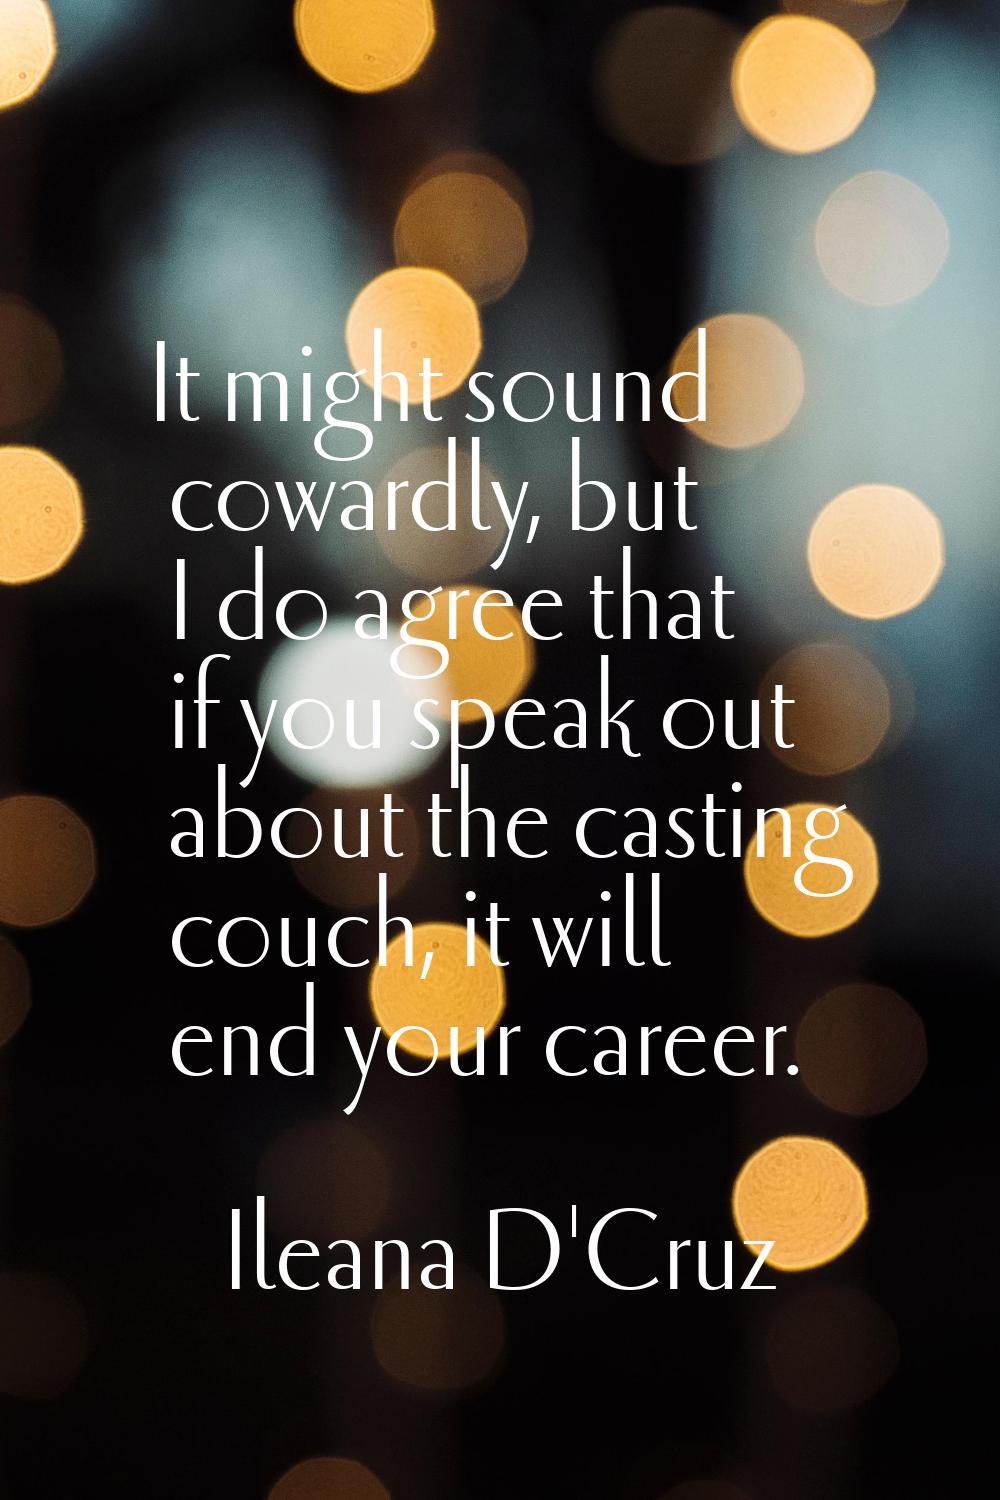 It might sound cowardly, but I do agree that if you speak out about the casting couch, it will end 